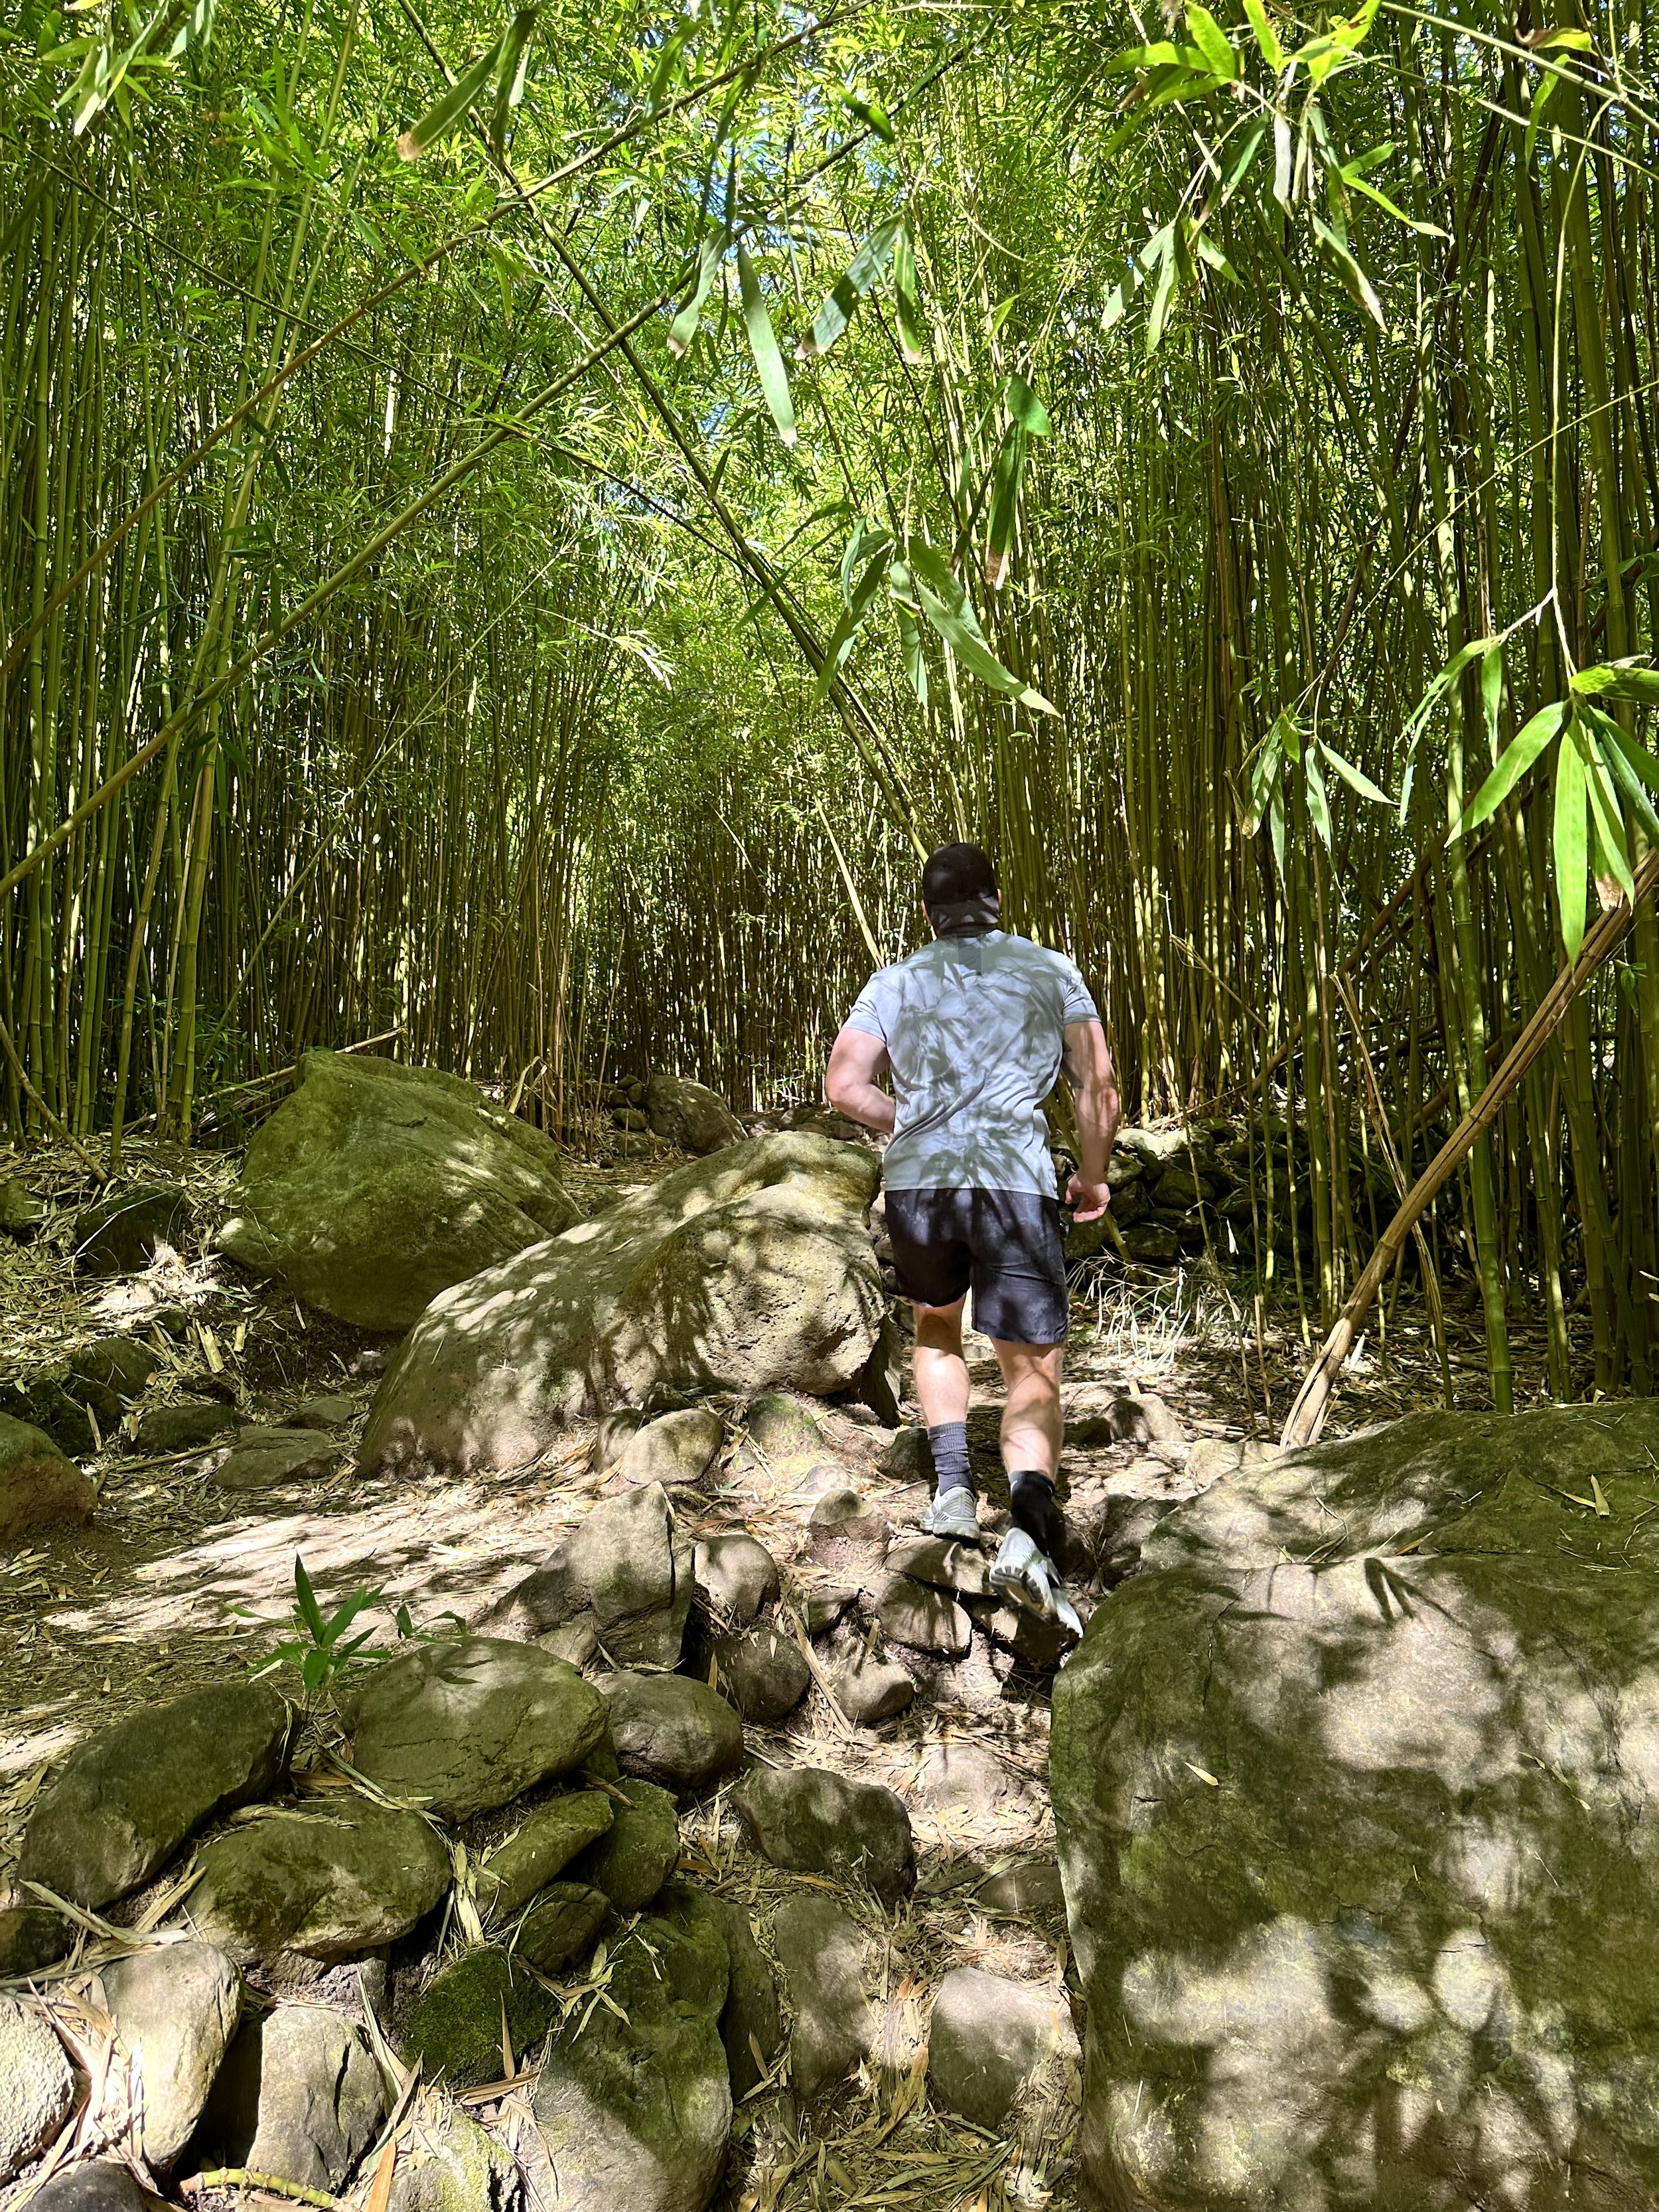 Hiked through a bamboo forest 